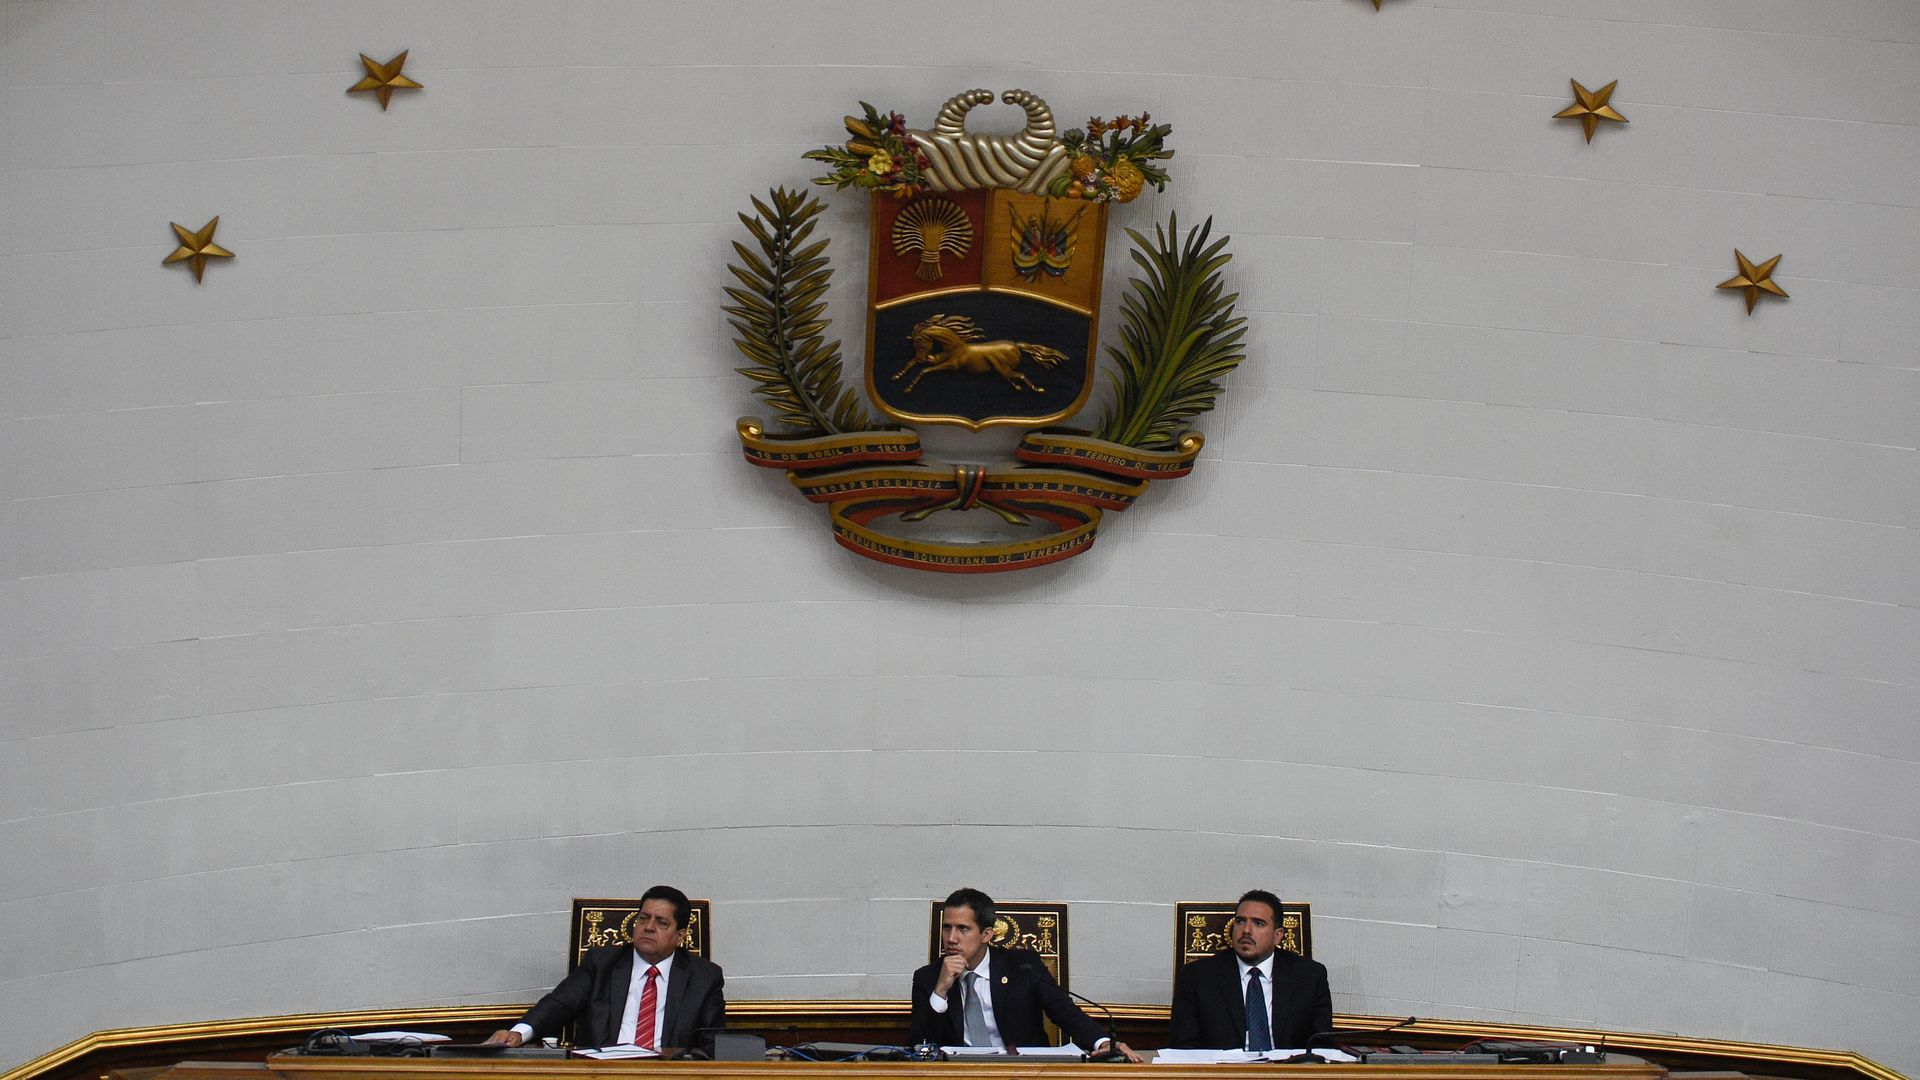 Juan Guaido sits with two other men at the National Assembly in Venezuela. 